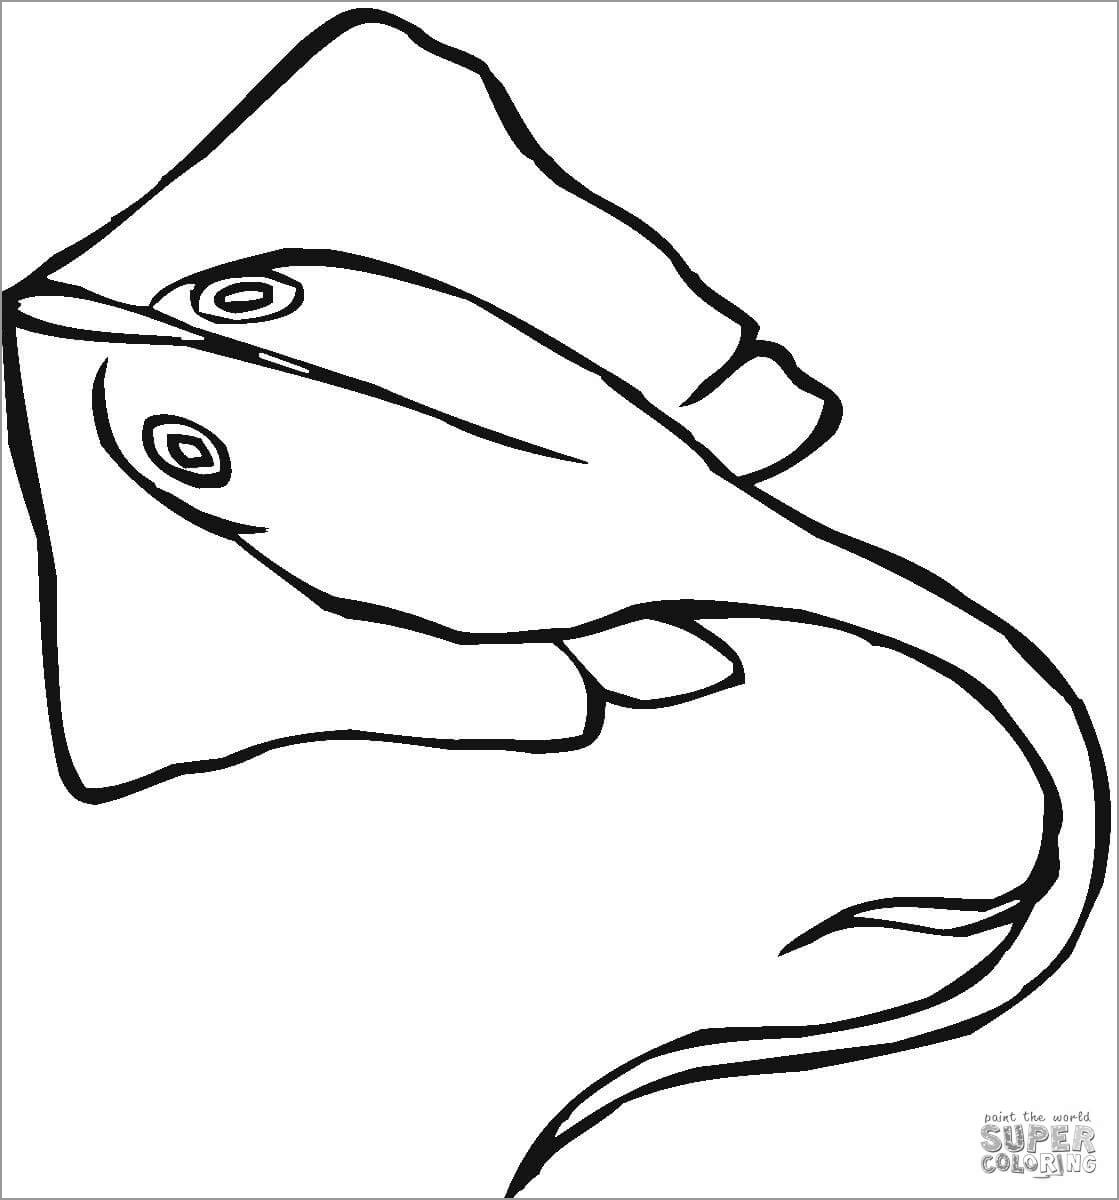 mr ray finding nemo coloring page